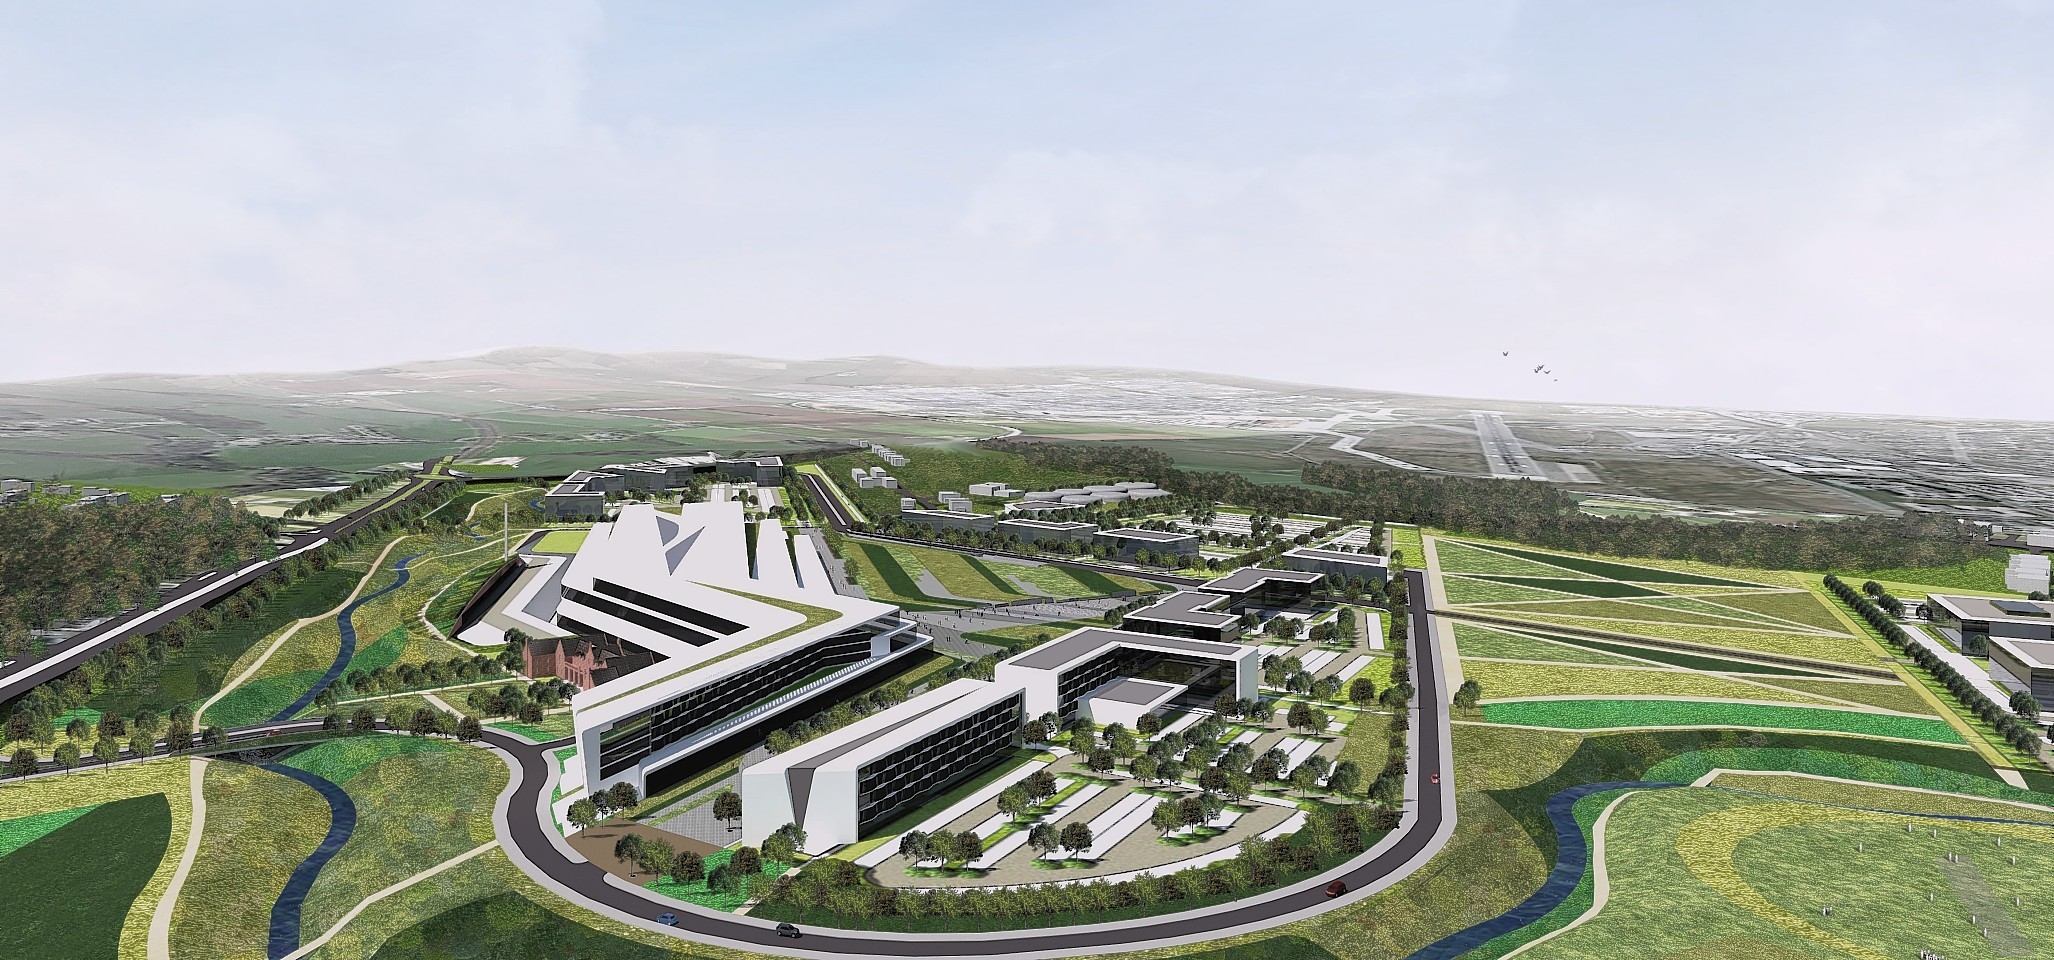 New artist impressions for the AECC